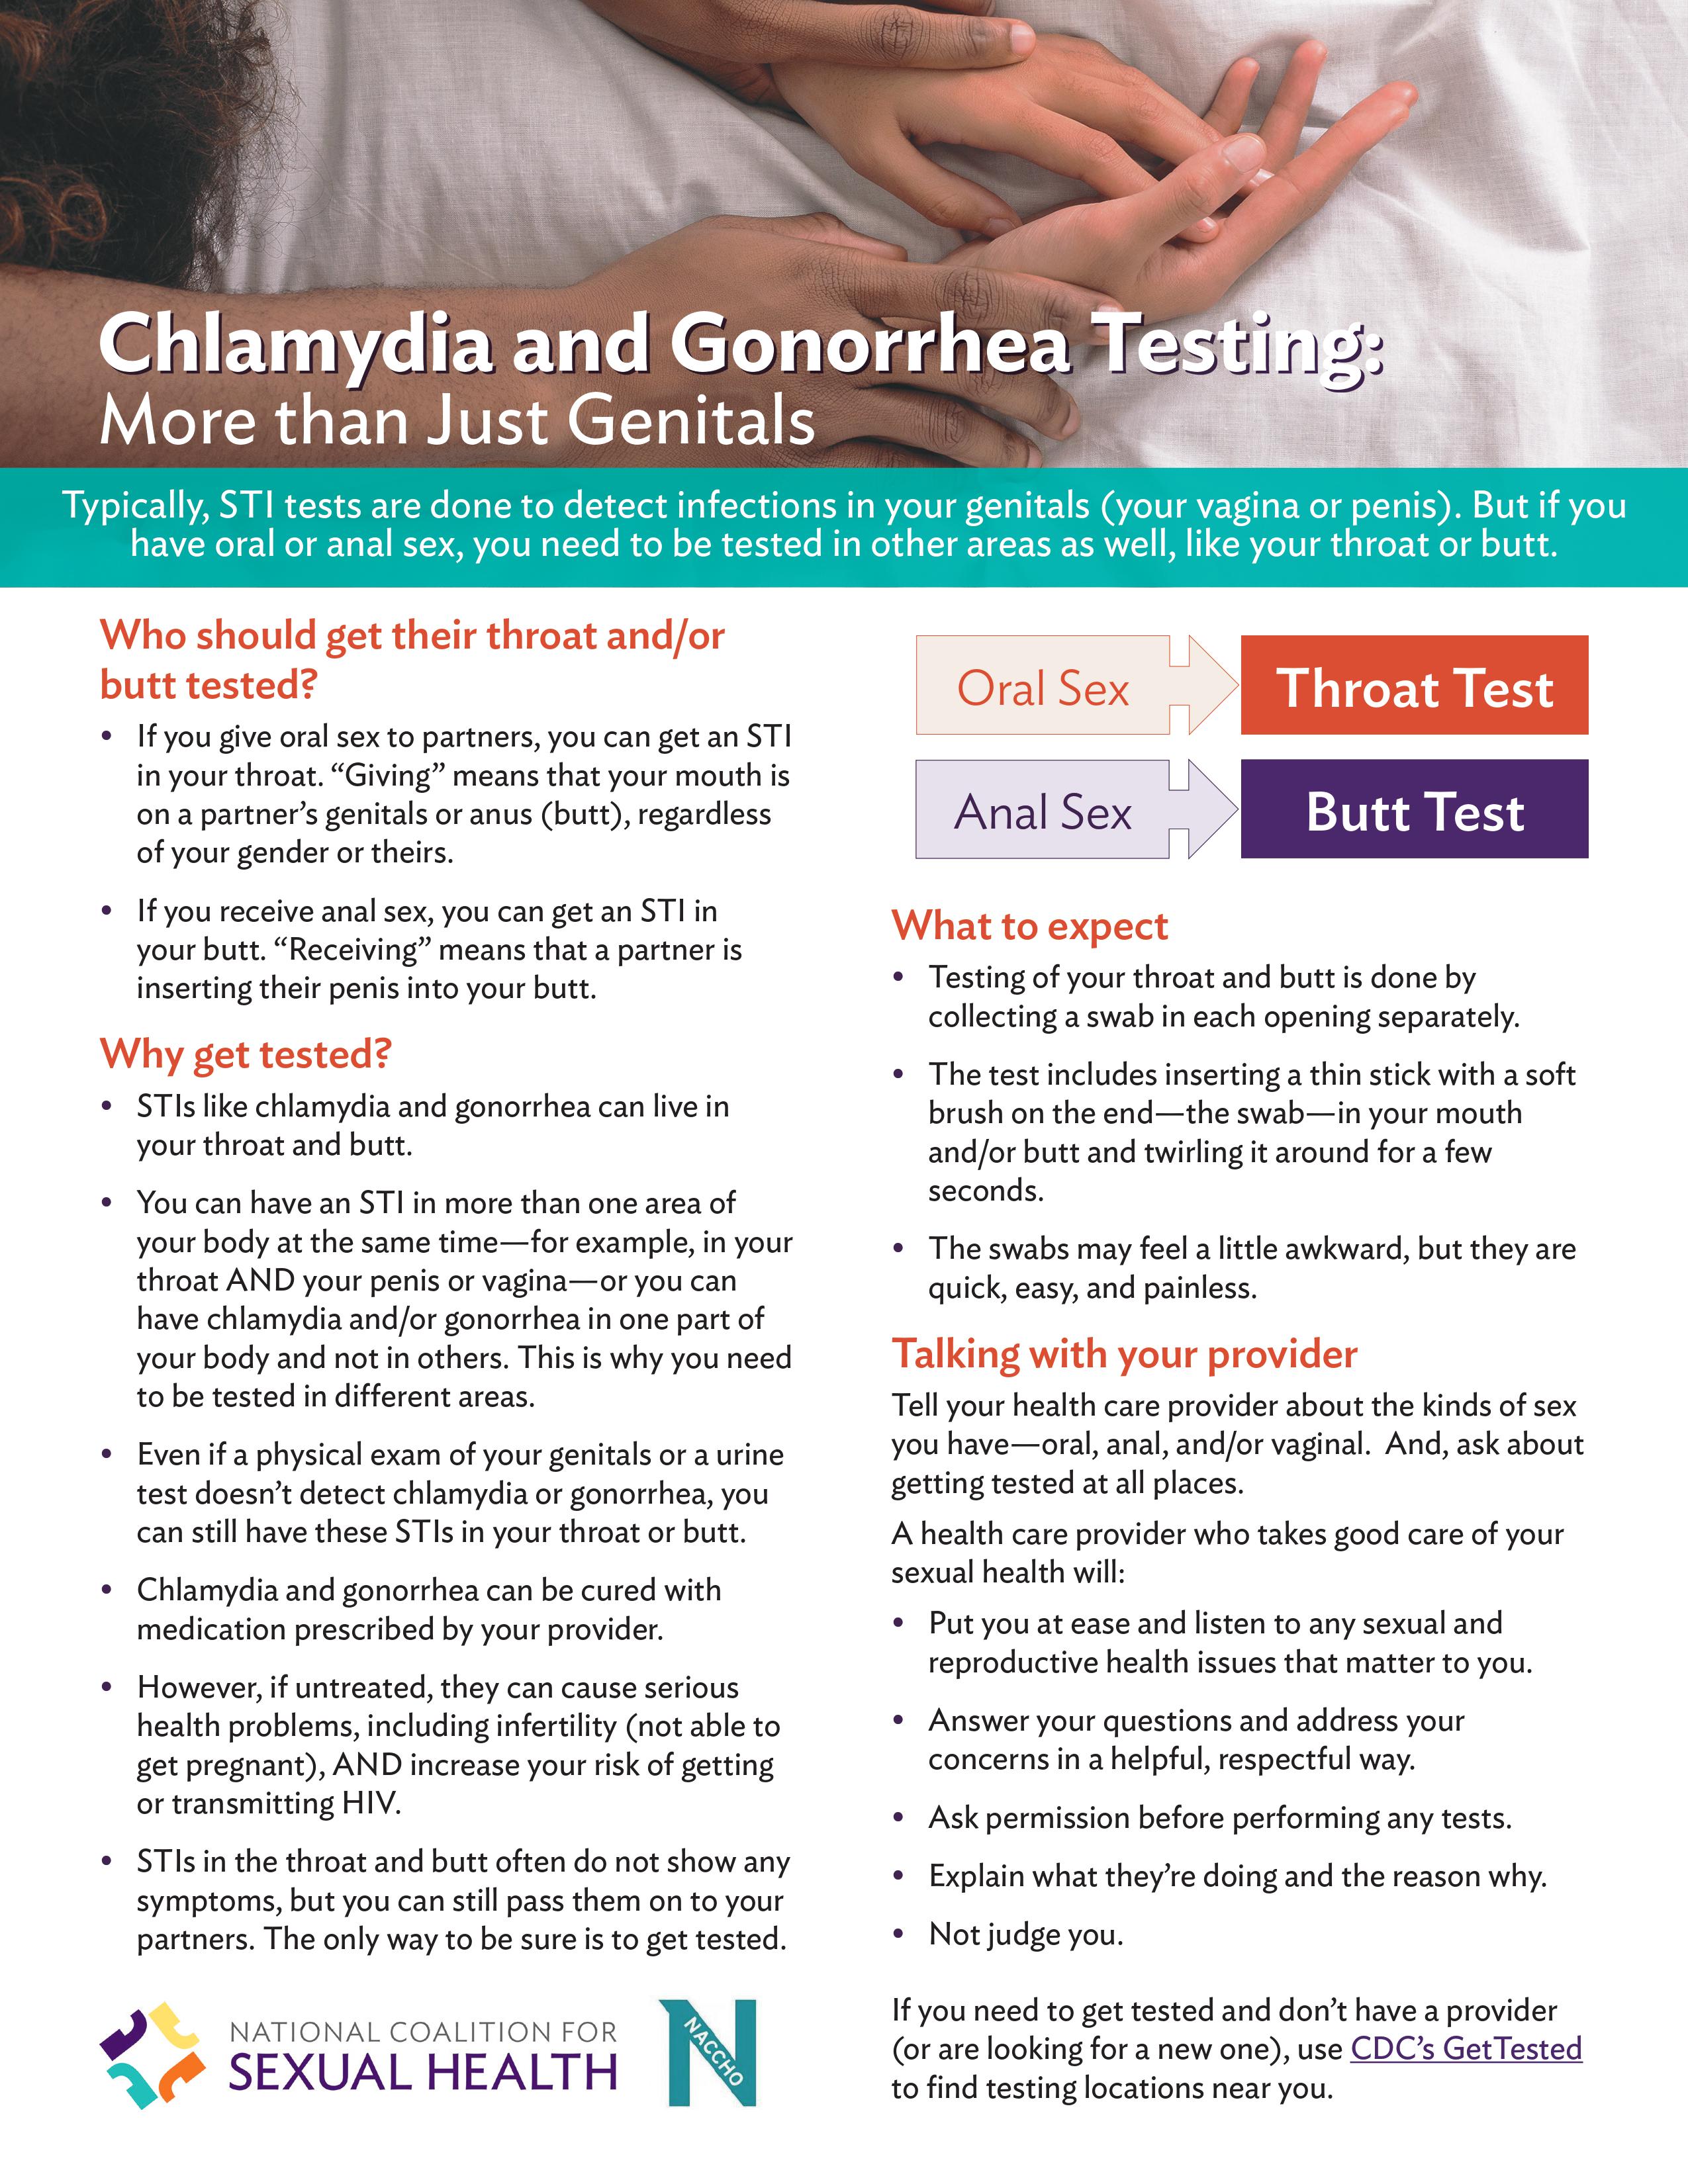 Chlamydia and Gonorrhea Testing: More Than Just Genitals